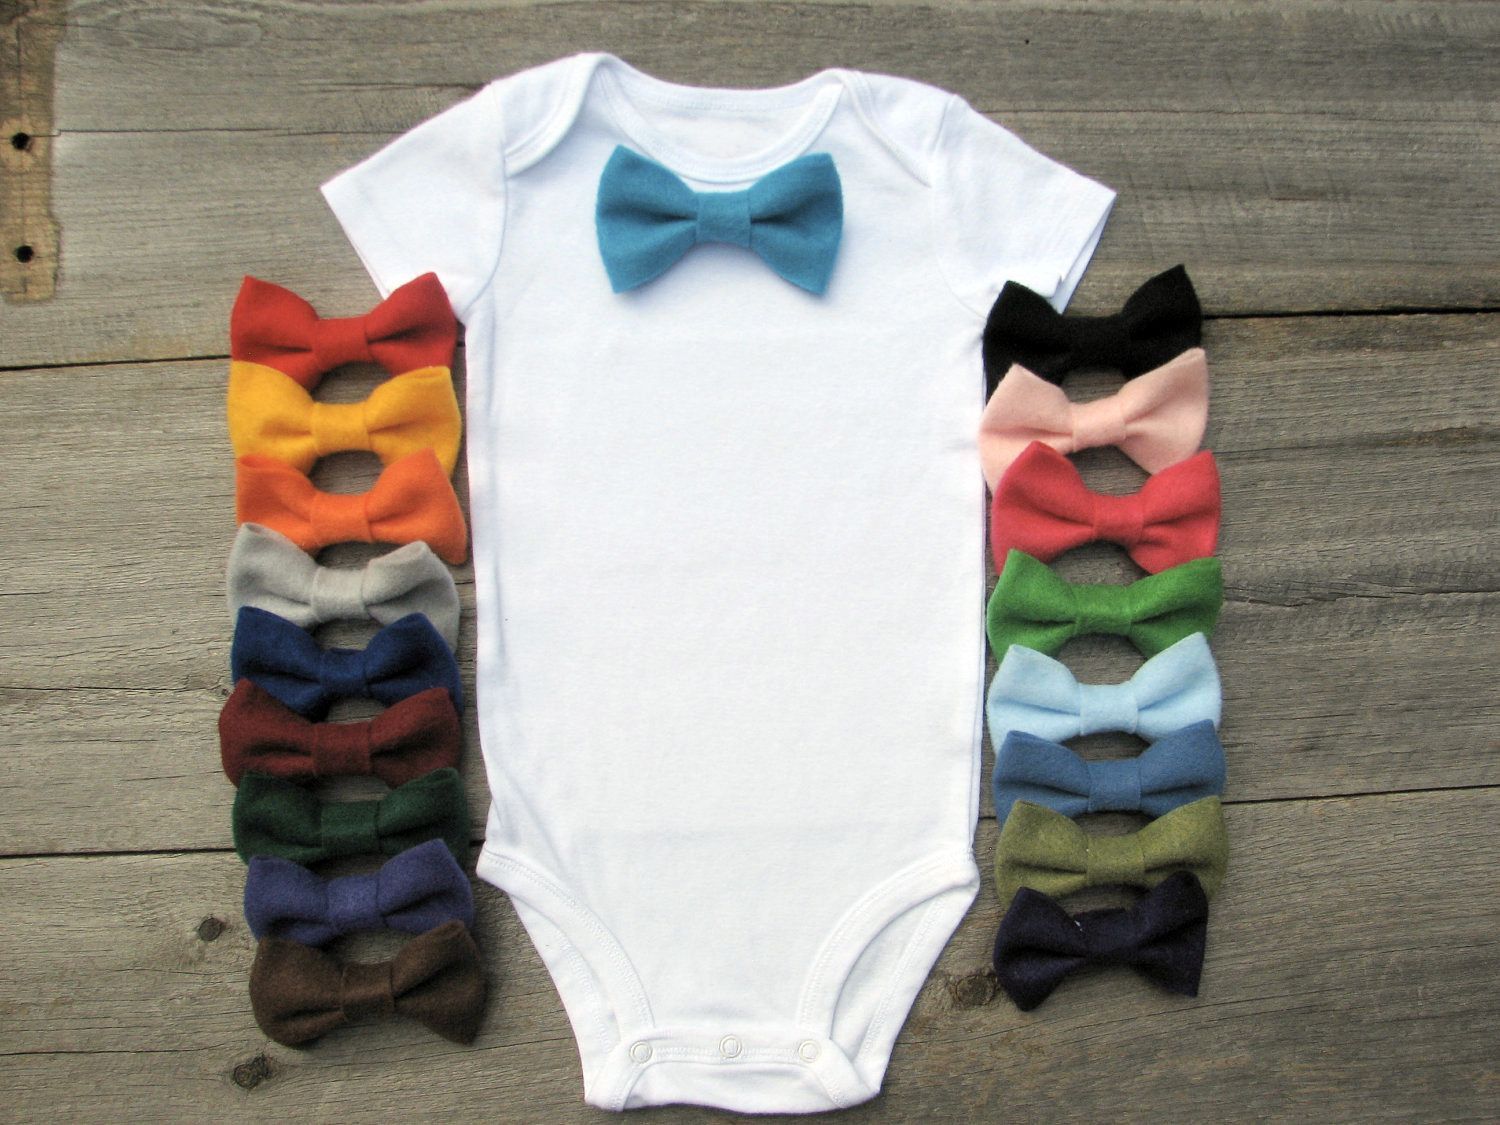 Little man onesie idea– make different color bow ties and attach with a snap.